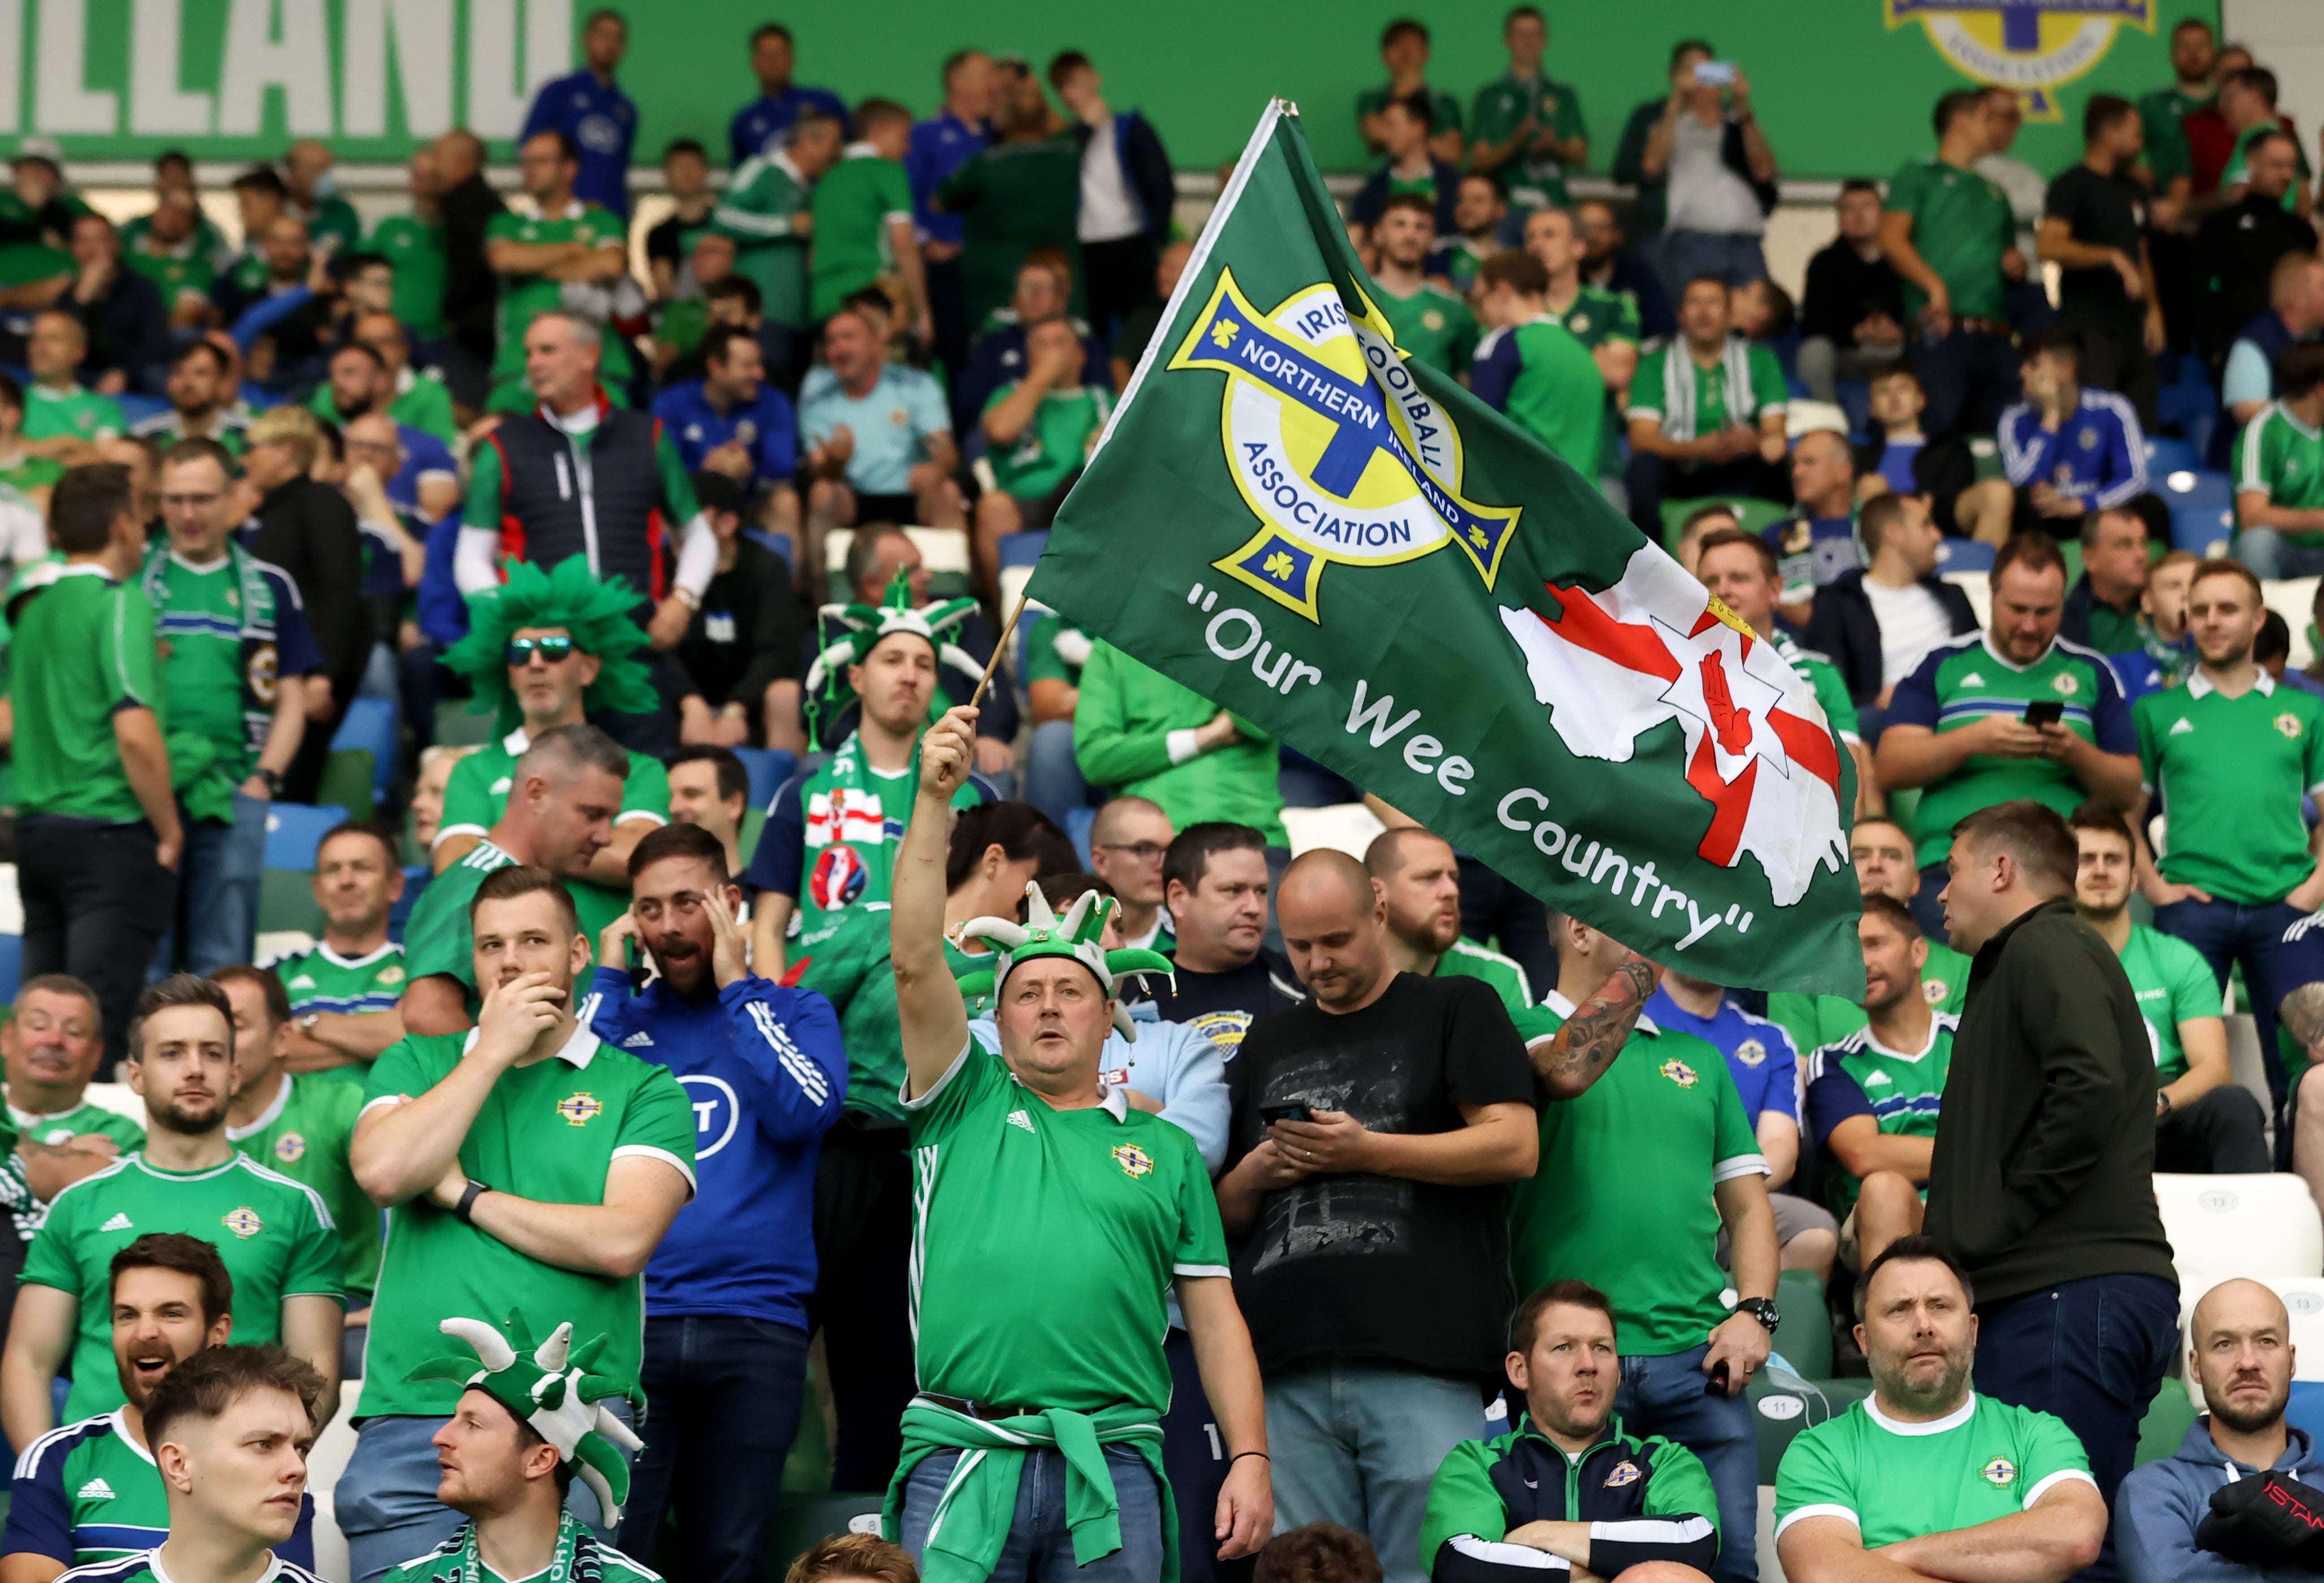 DUP Economy Minister Gordon Lyons said Northern Ireland cannot currently support the UK and Ireland bid to host Euro 2028 (PA)